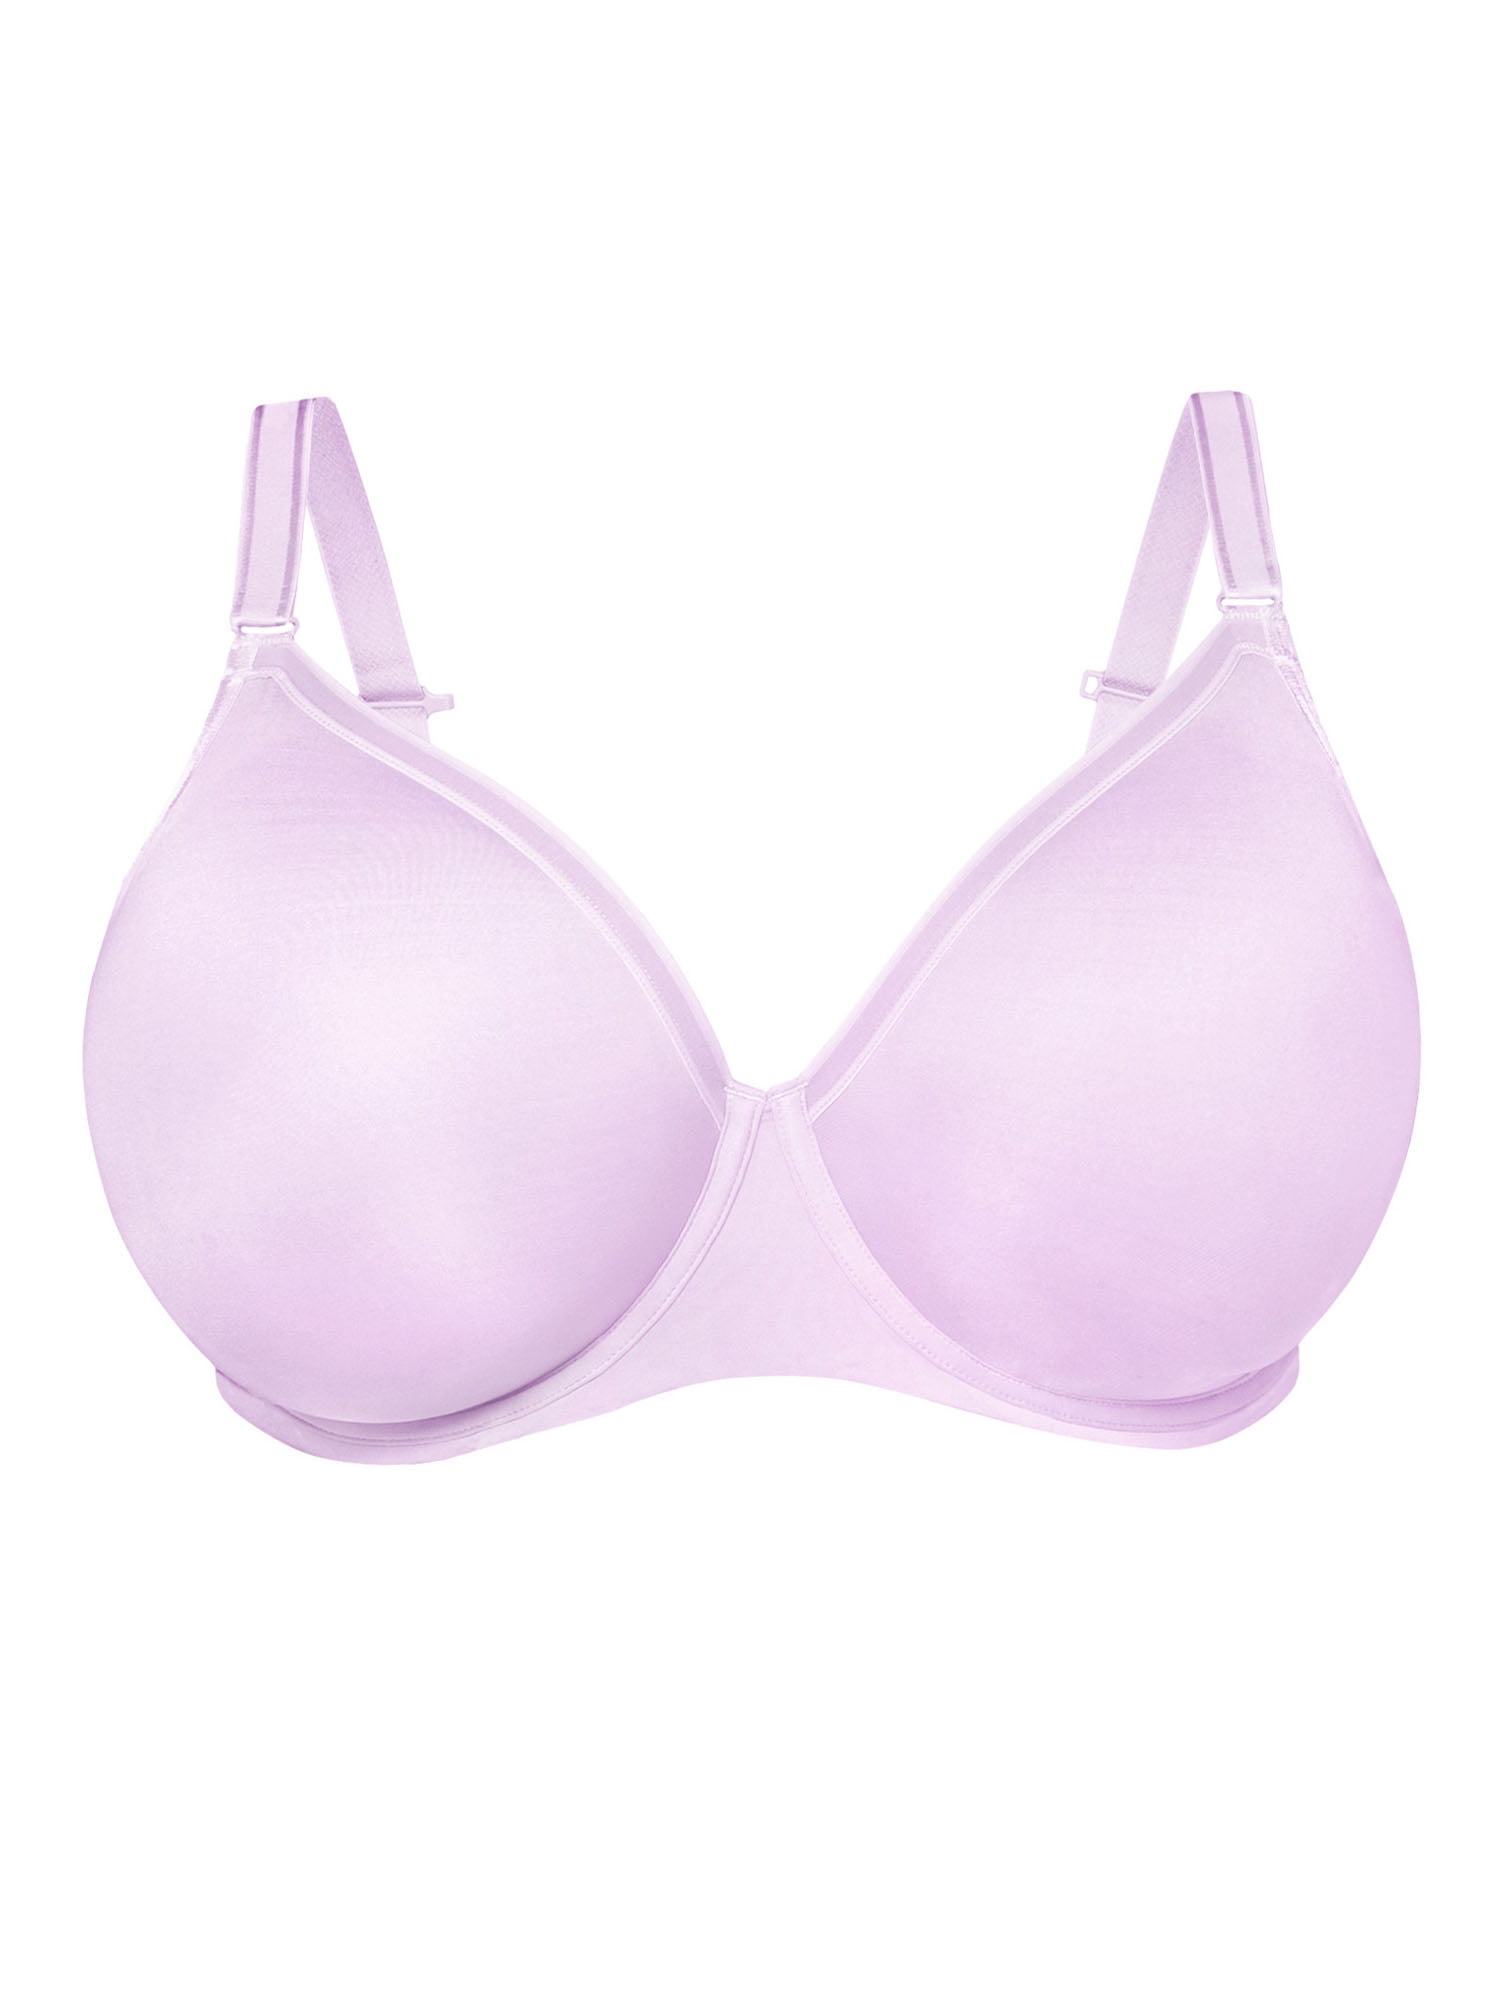 Fruit of the Loom Fit for Me Underwire Bras Review